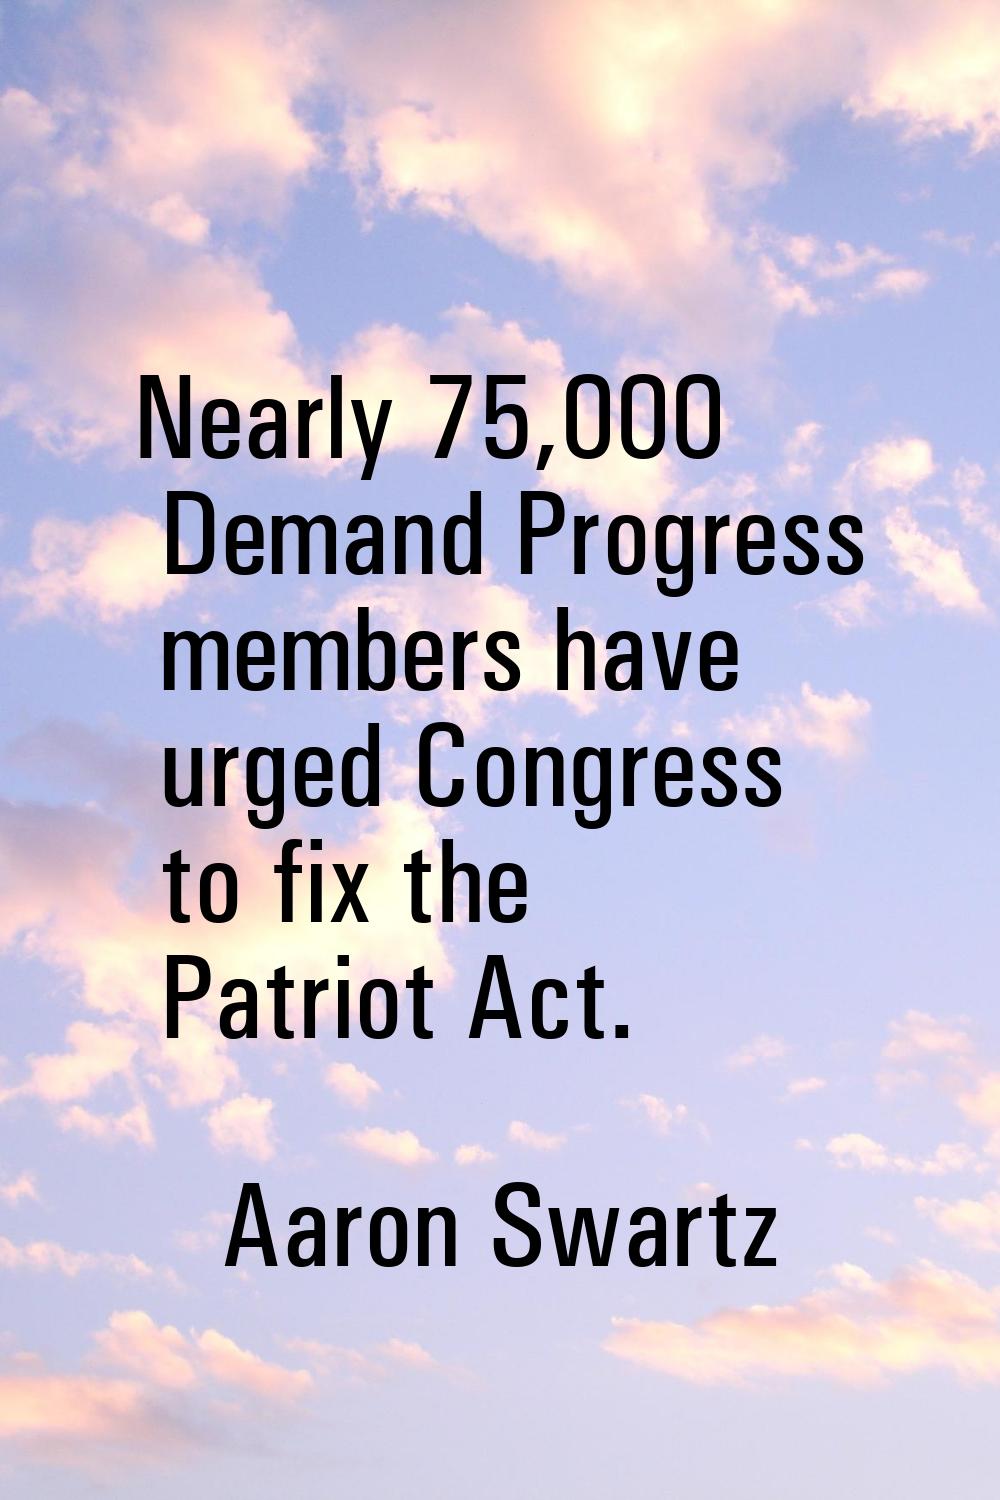 Nearly 75,000 Demand Progress members have urged Congress to fix the Patriot Act.